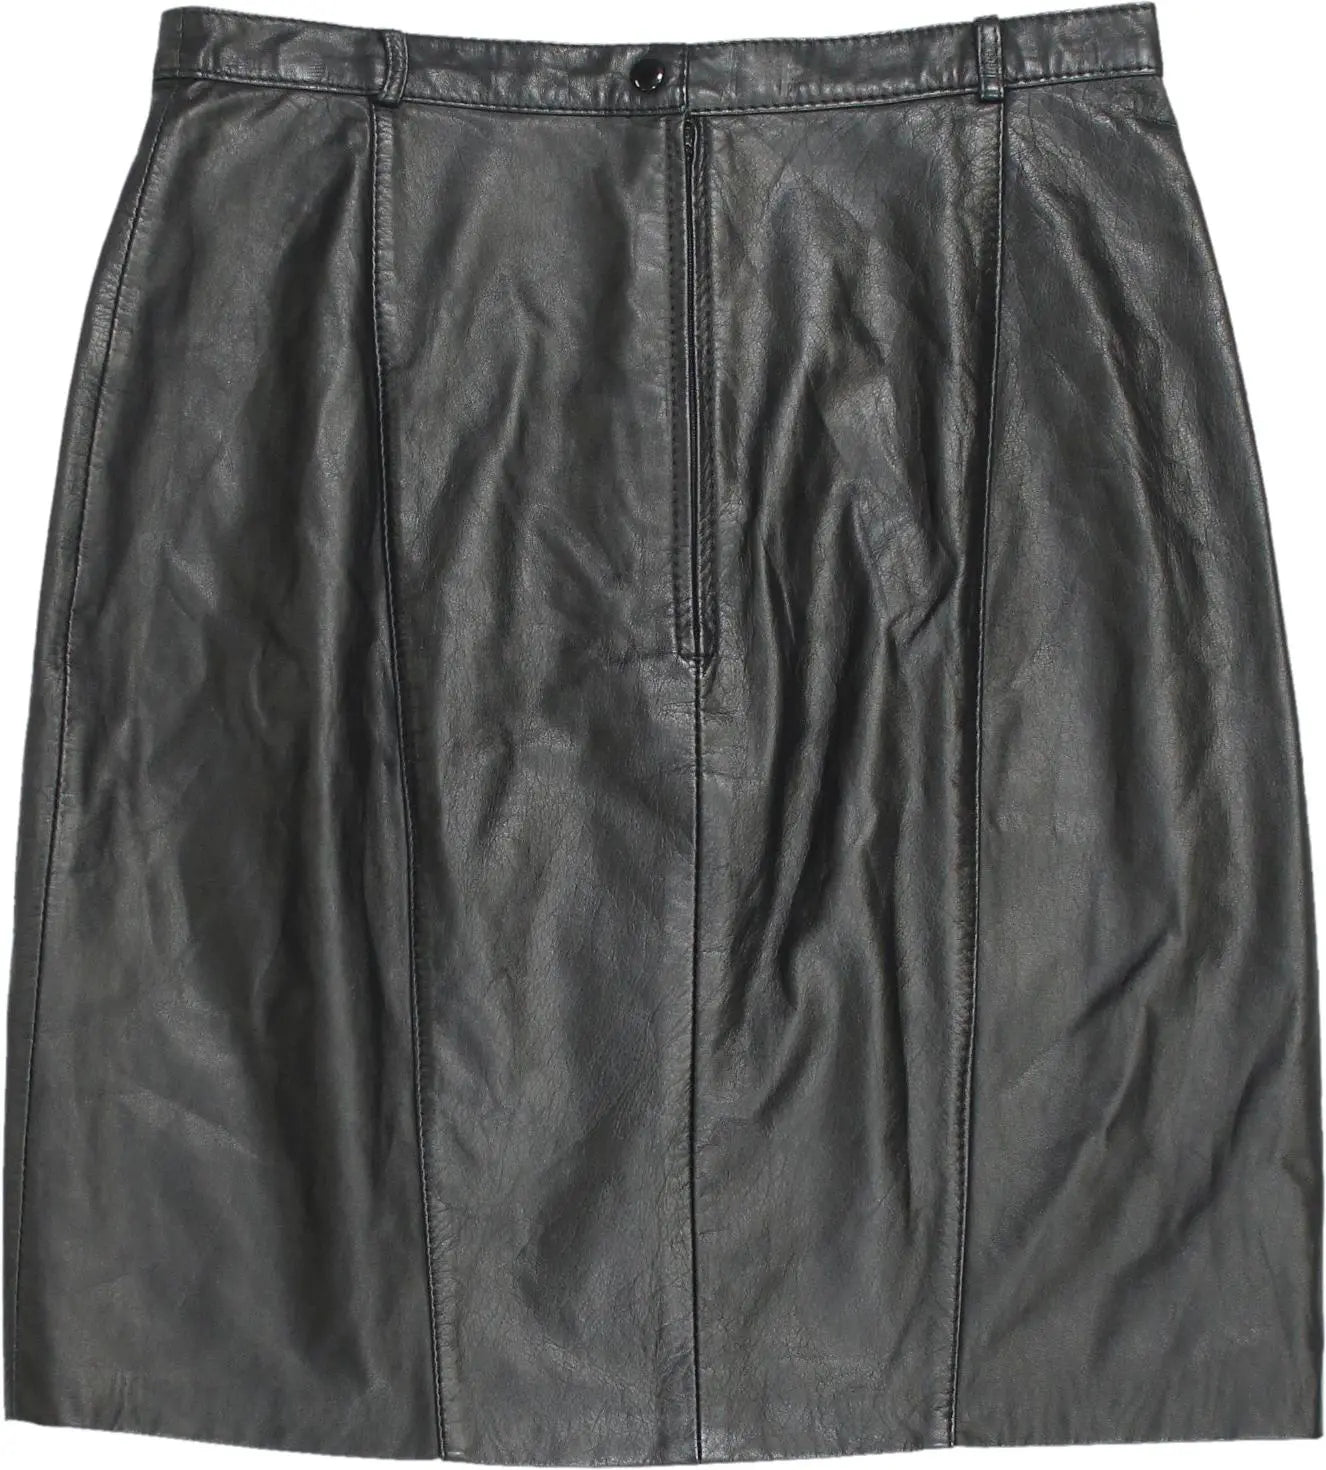 Unknown - Black Leather Skirt- ThriftTale.com - Vintage and second handclothing